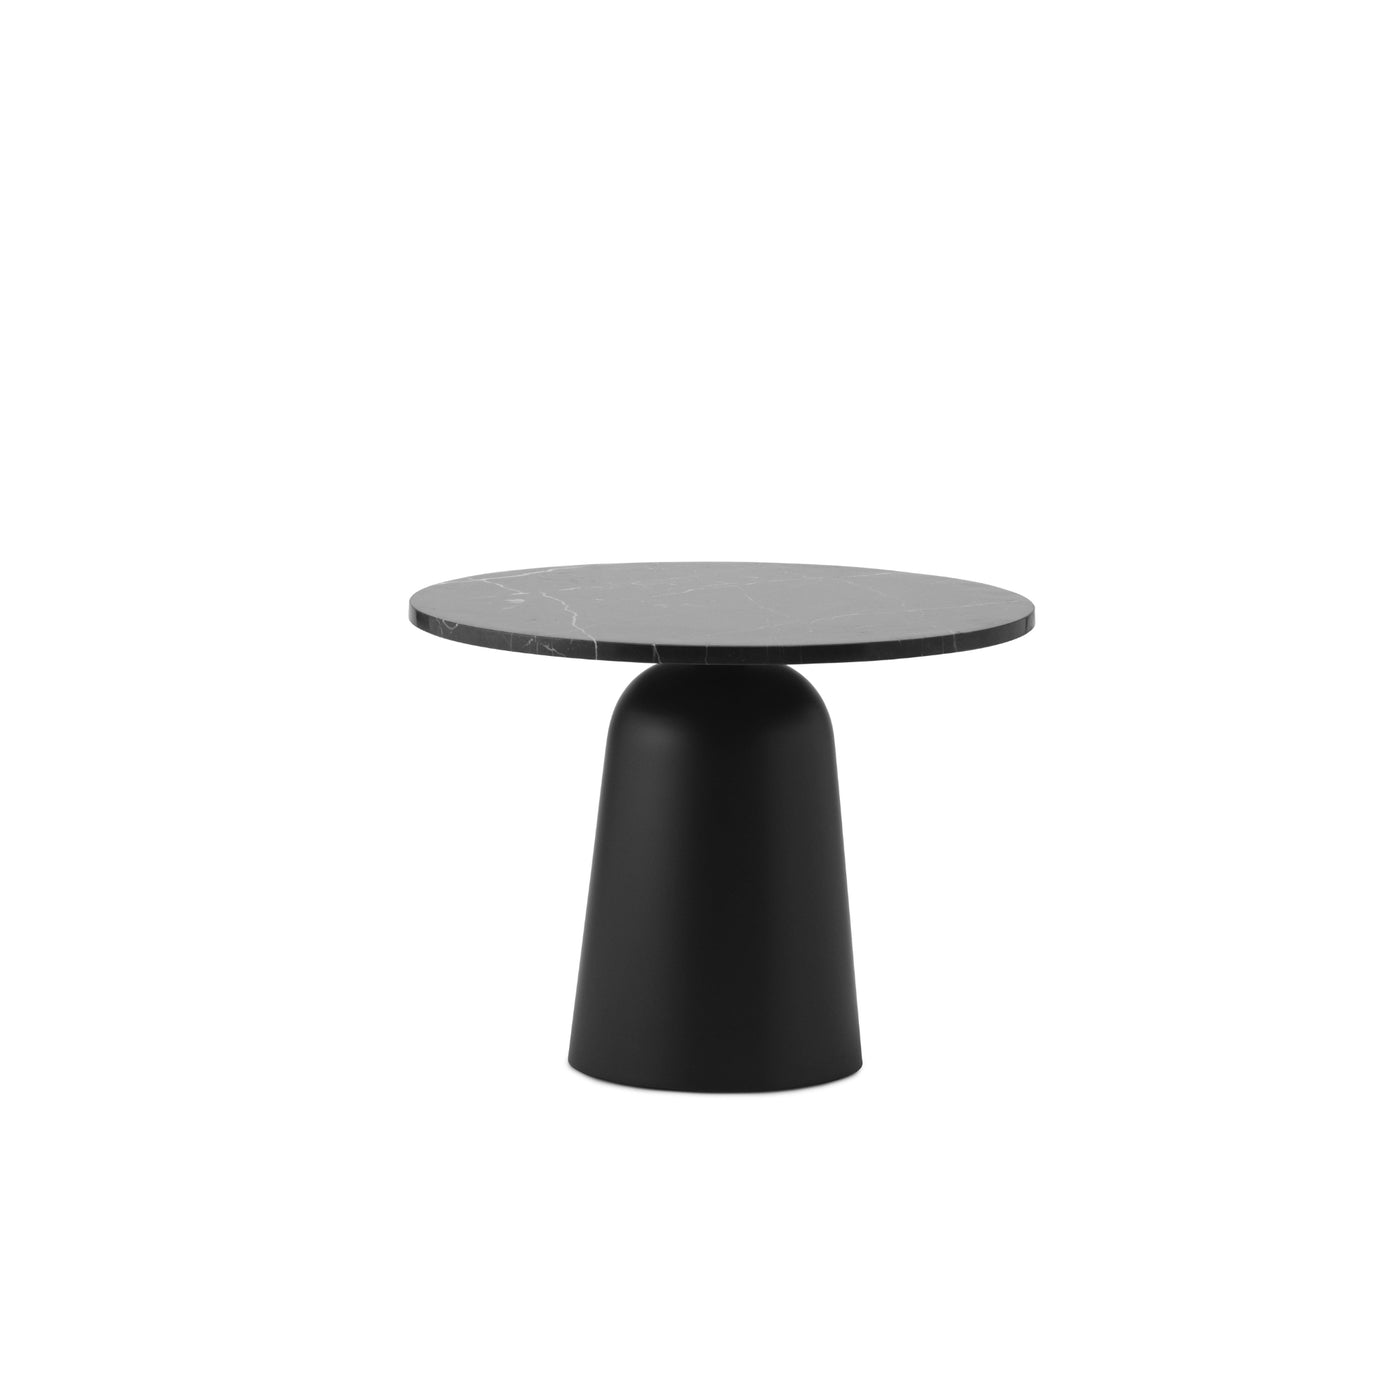 Normann Copenhagen Turn Table at someday designs. #colour_black-marble